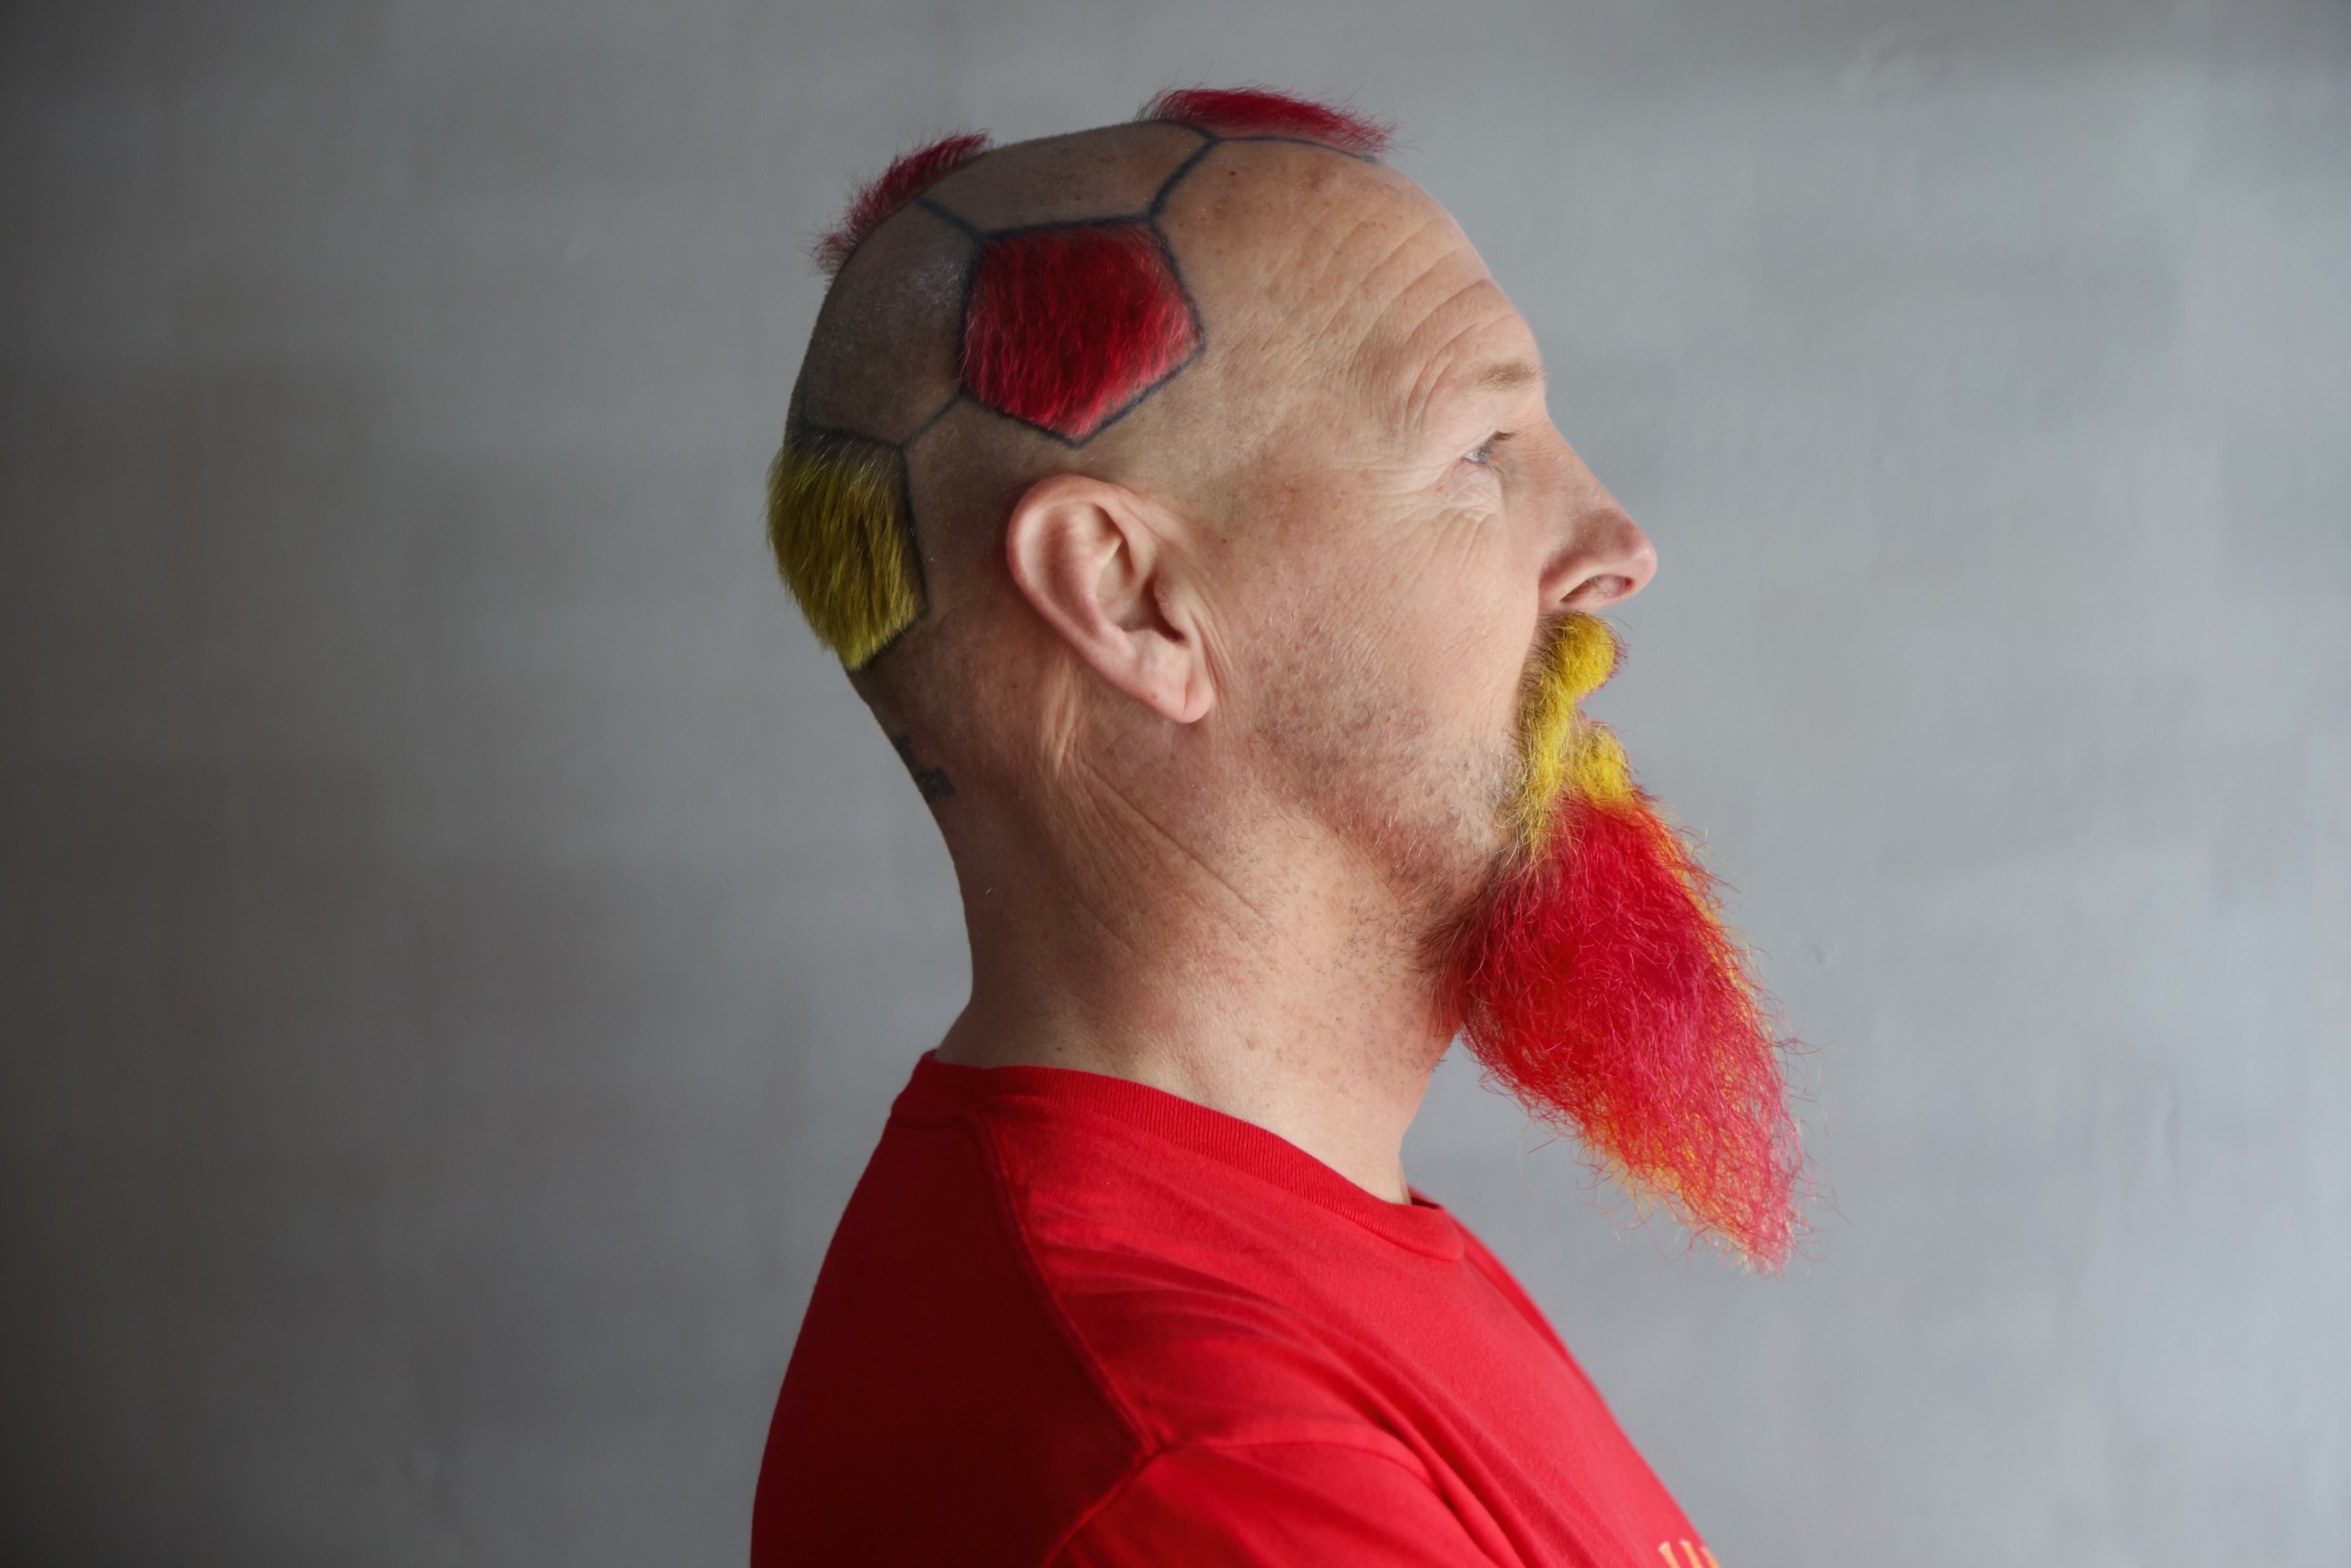 A man with a soccer ball pattern shaved and dyed into his hair and beard, showcasing red, yellow, and natural colors.